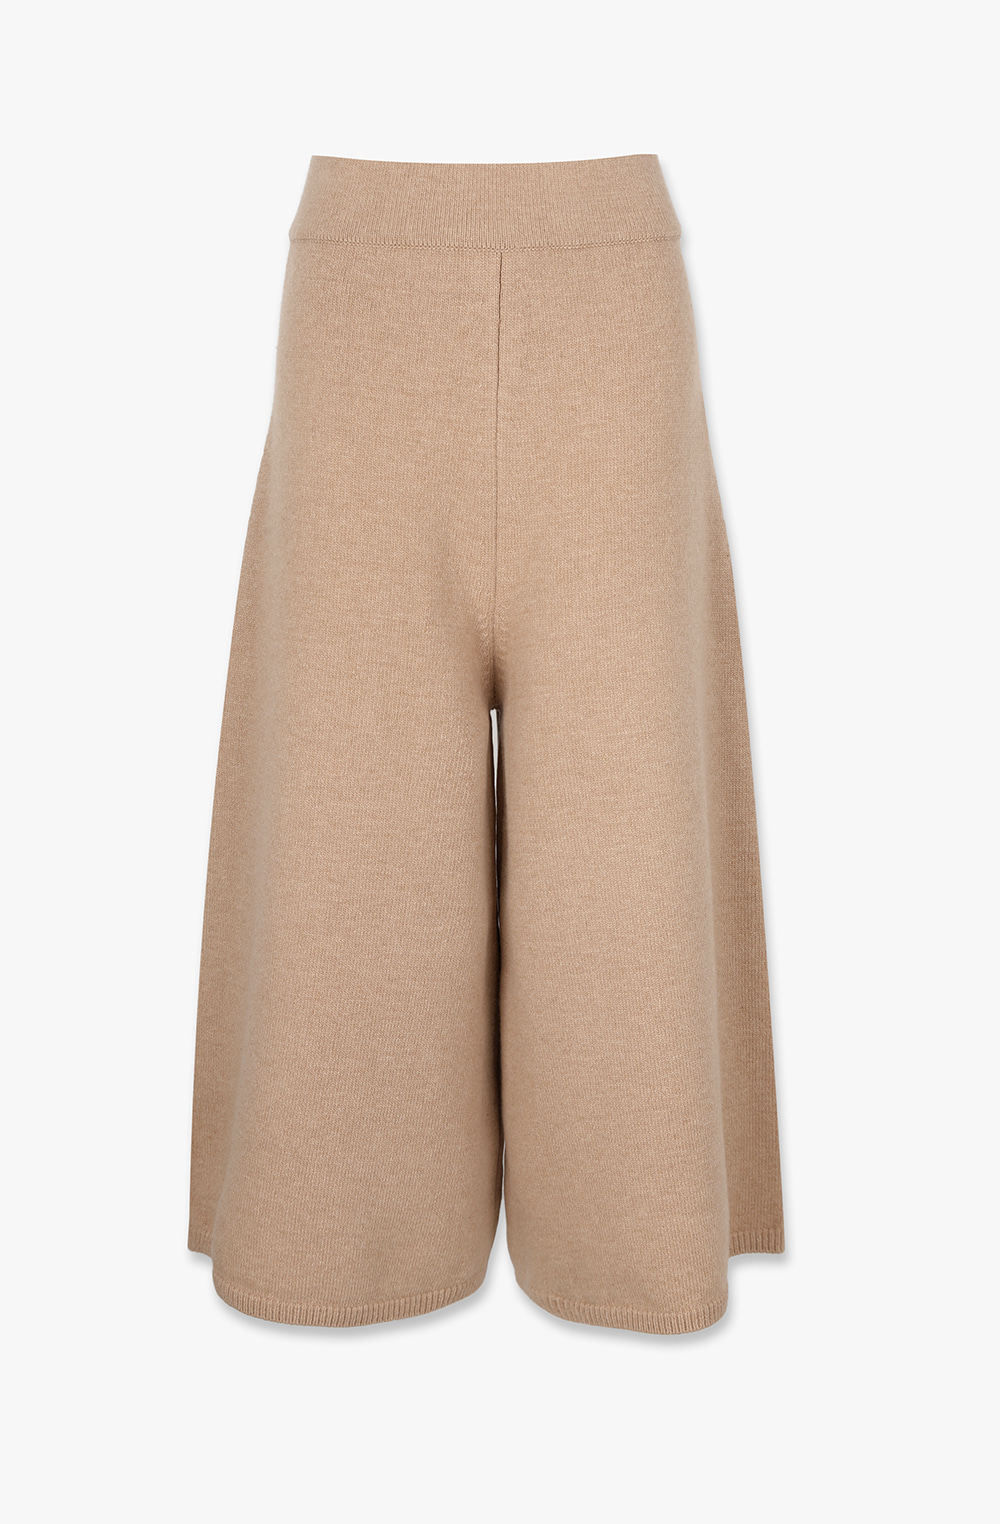 HIGH QUALITY LINE - MYEYEKO 23 Capsule Collection / Bailey Wide Leg Knit Pants (CAMEL BEIGE)